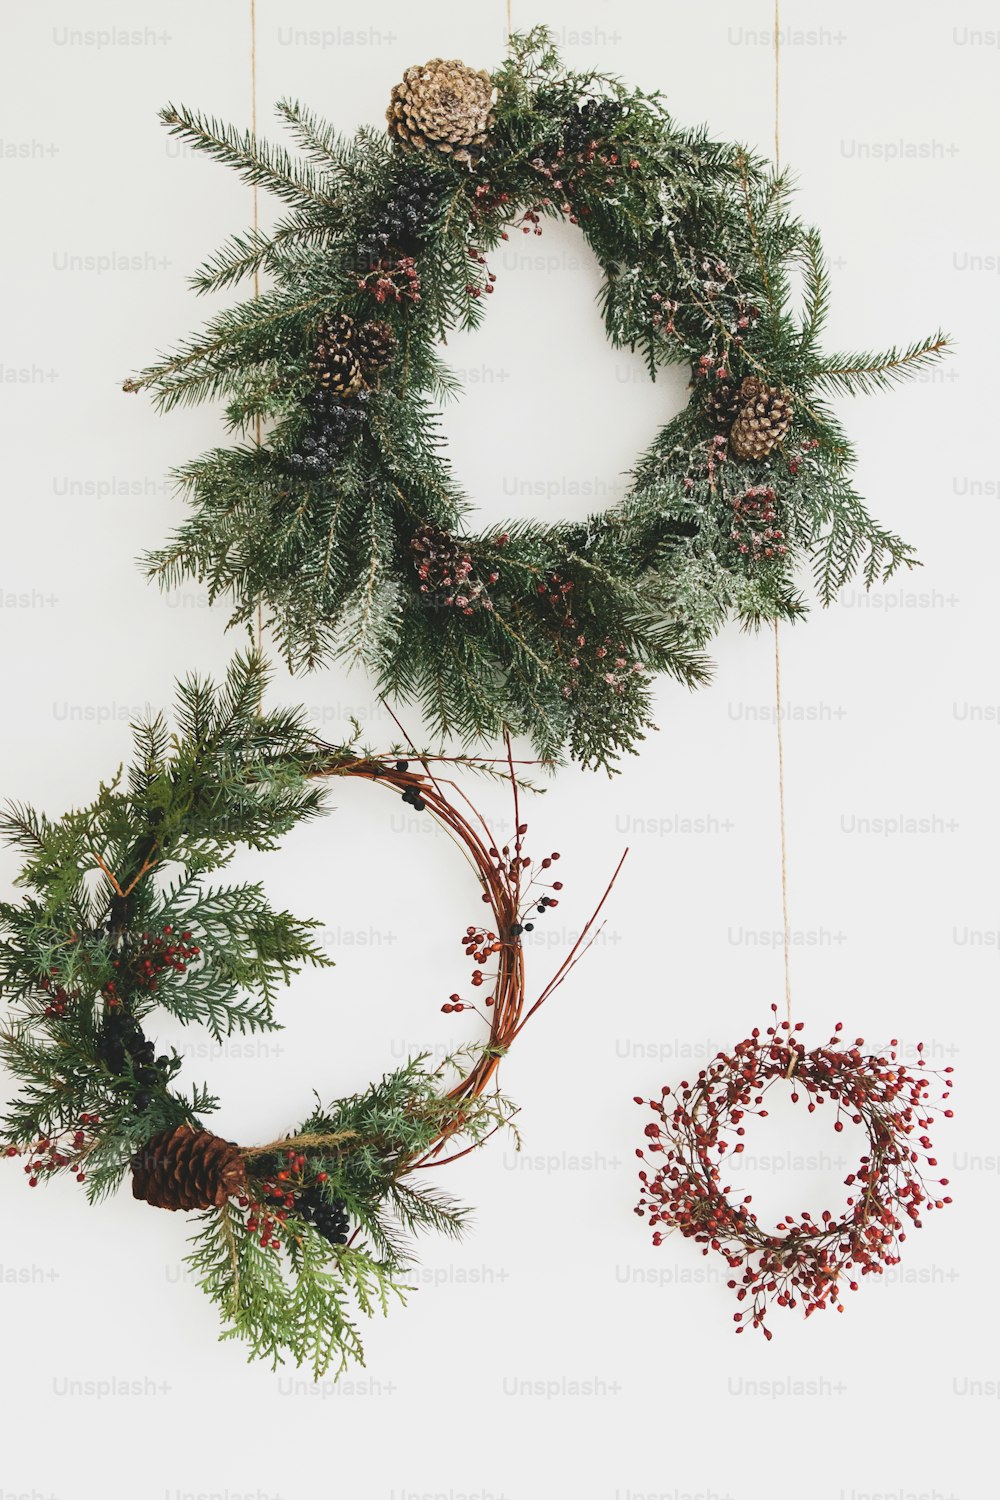 Rustic christmas wreath hanging on white wall, festive decoration. Creative natural and different christmas wreaths with red berries and fir branches, isolated on white. Merry Christmas